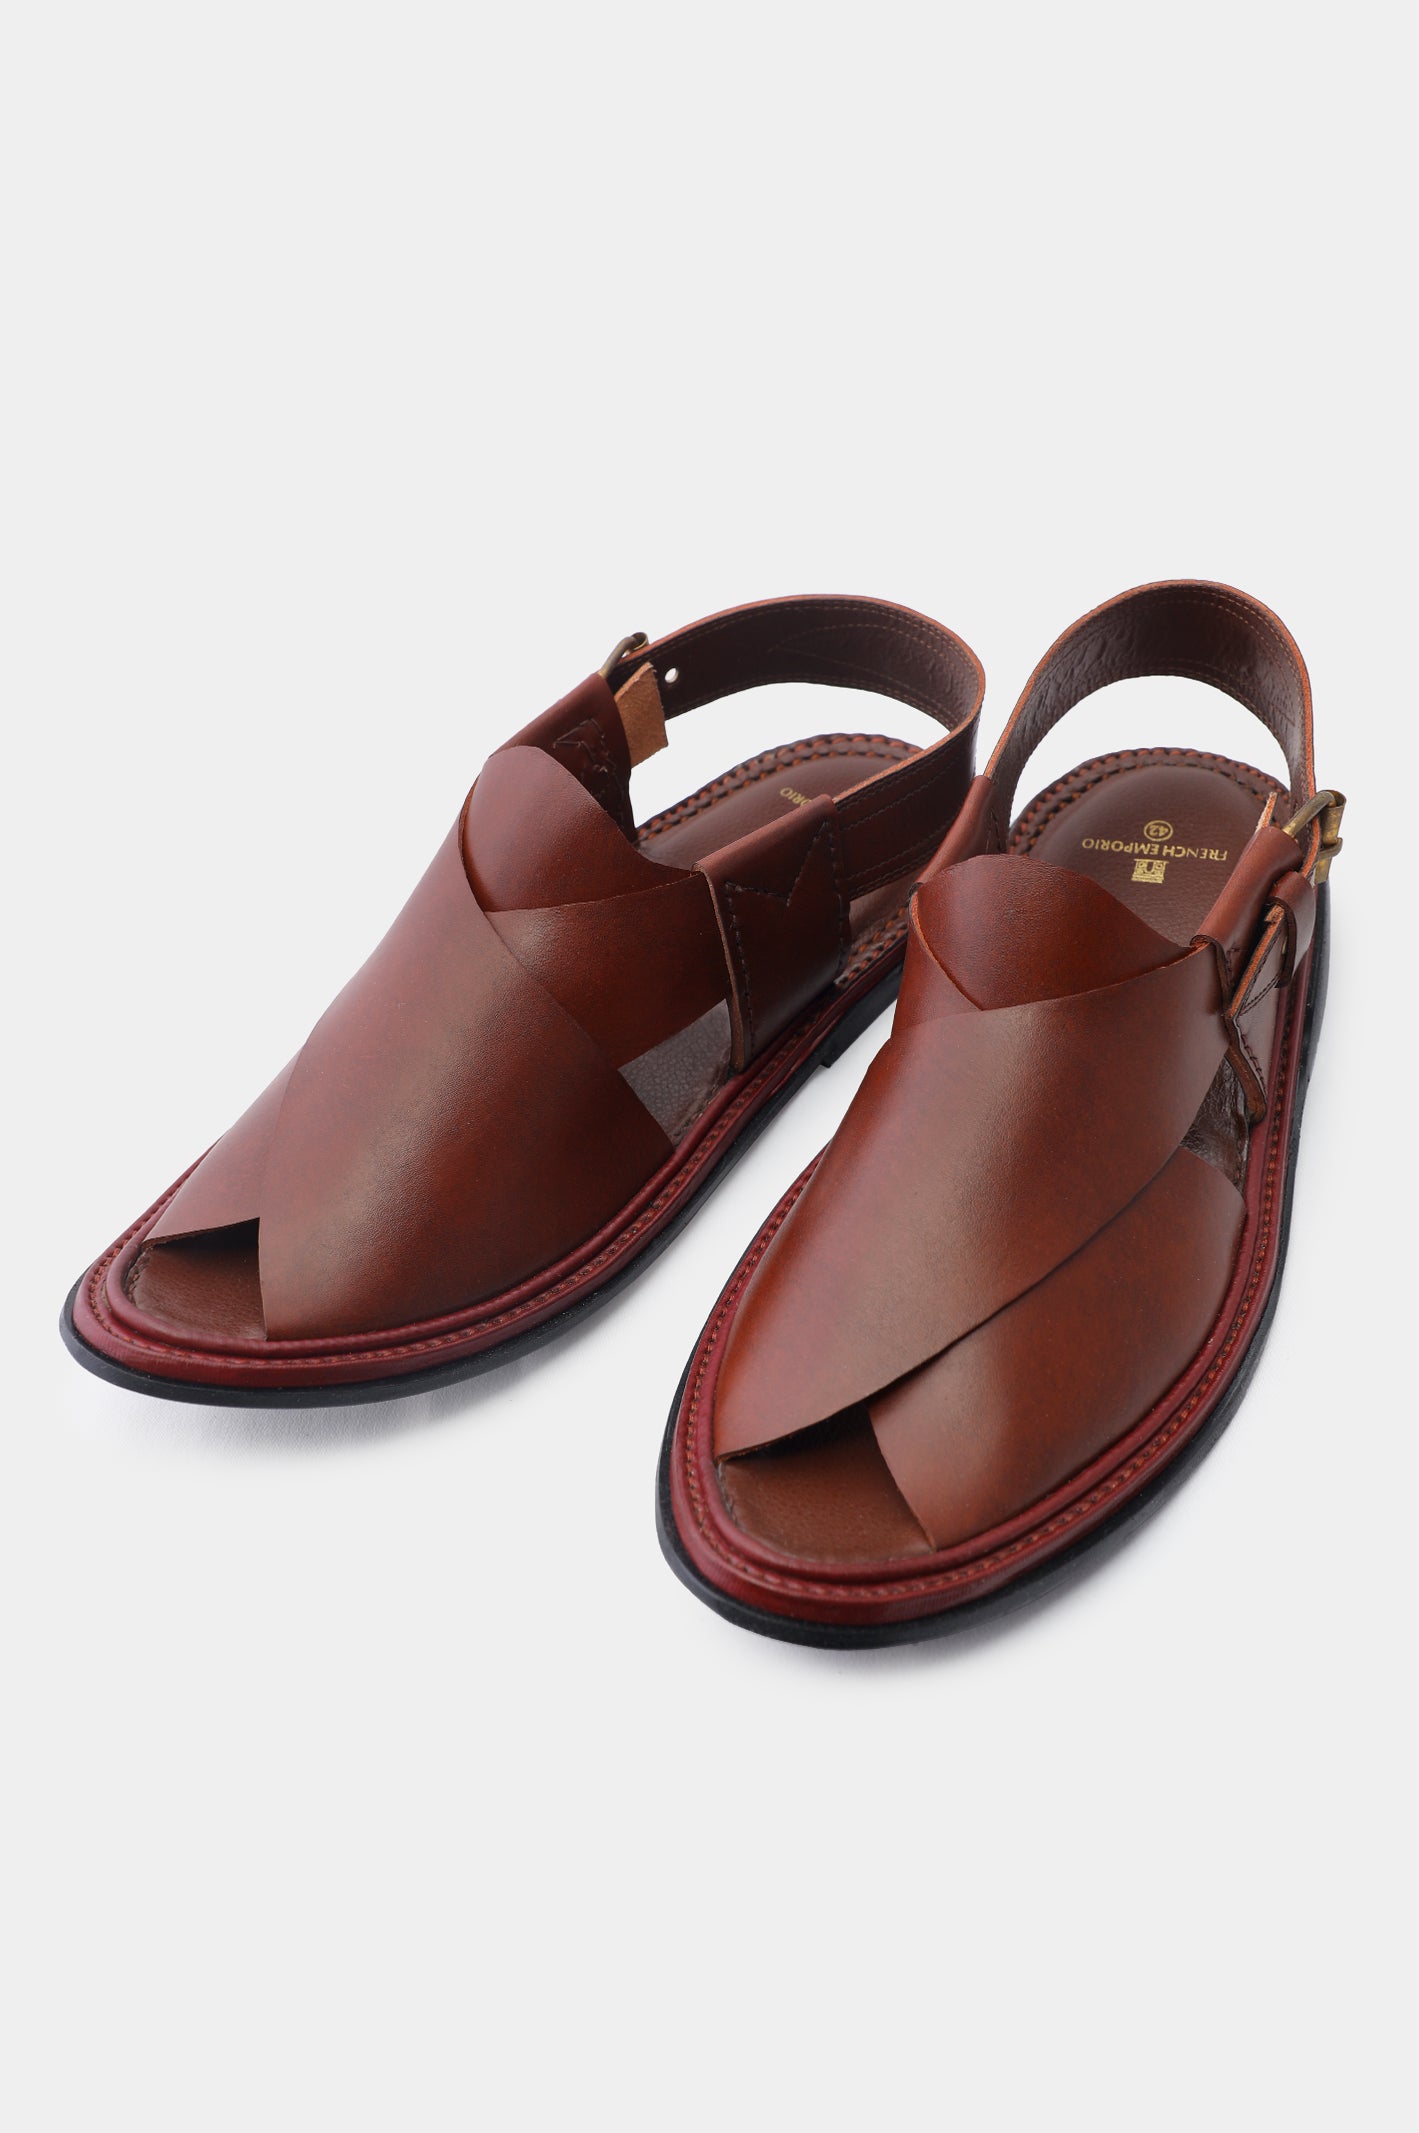 Men's Brown Cow Leather Sandals